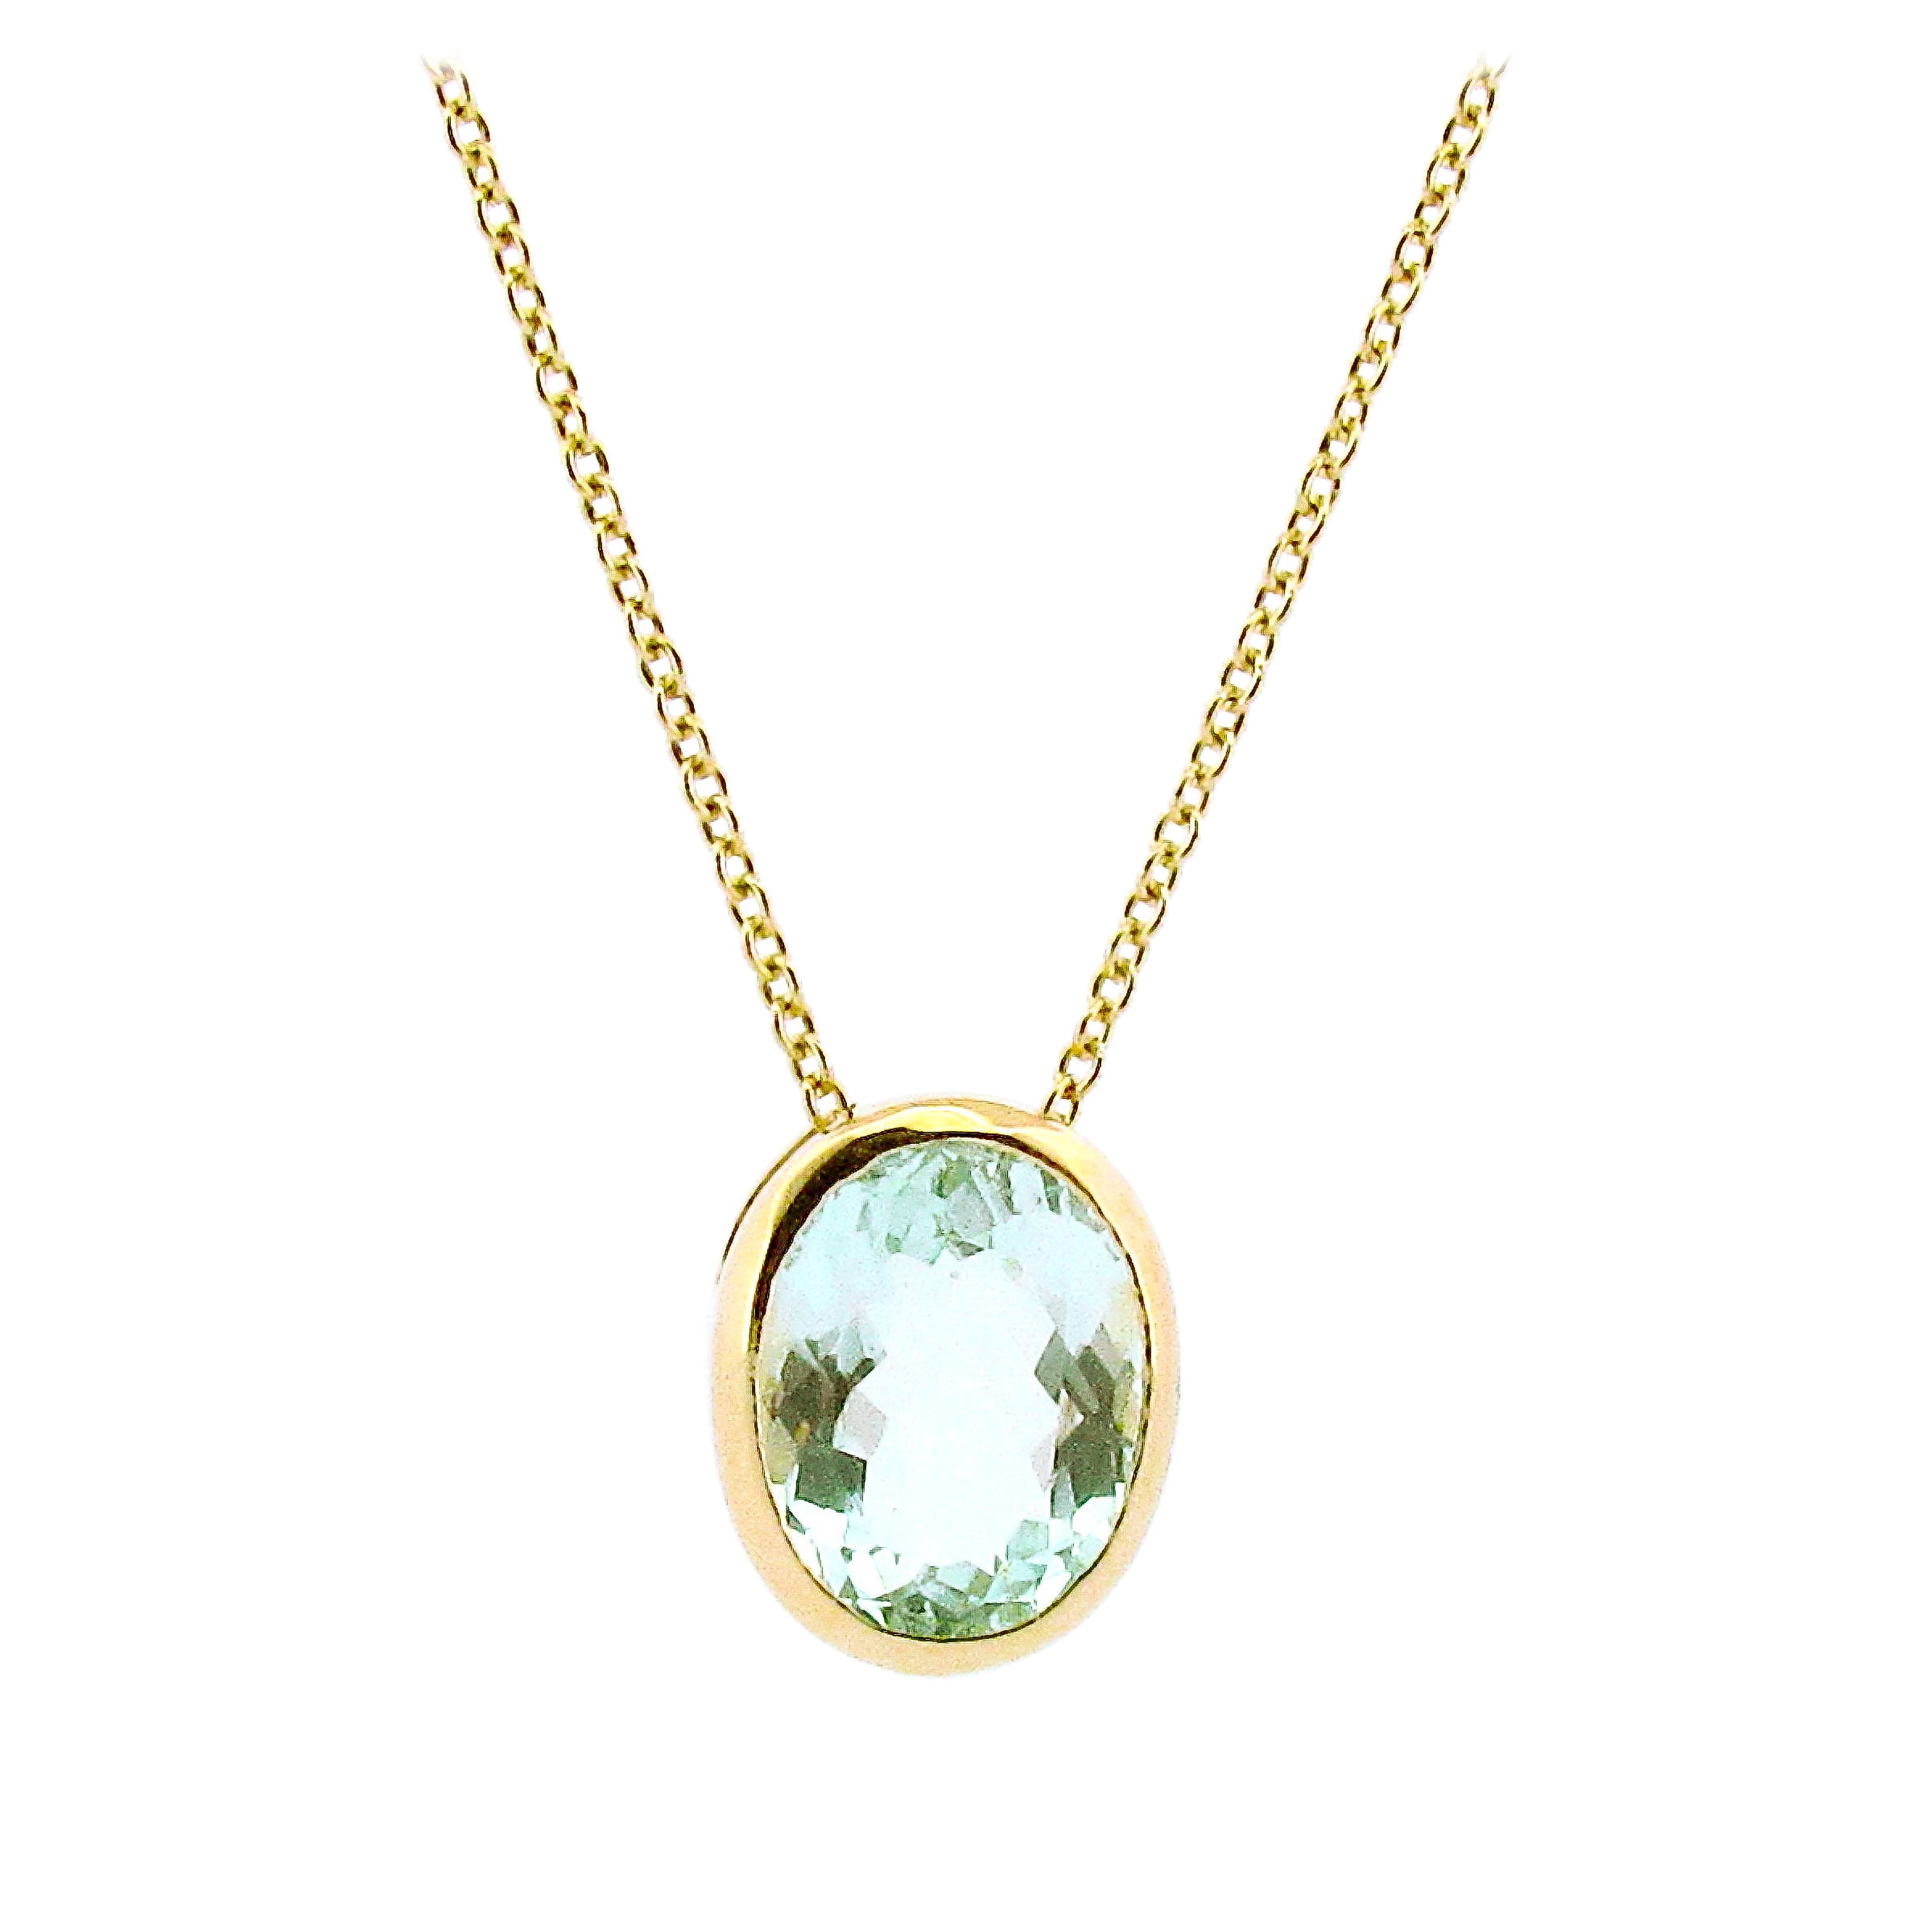 OOAK Yellow Gold Oval 2.05ct Aquamarine Necklace